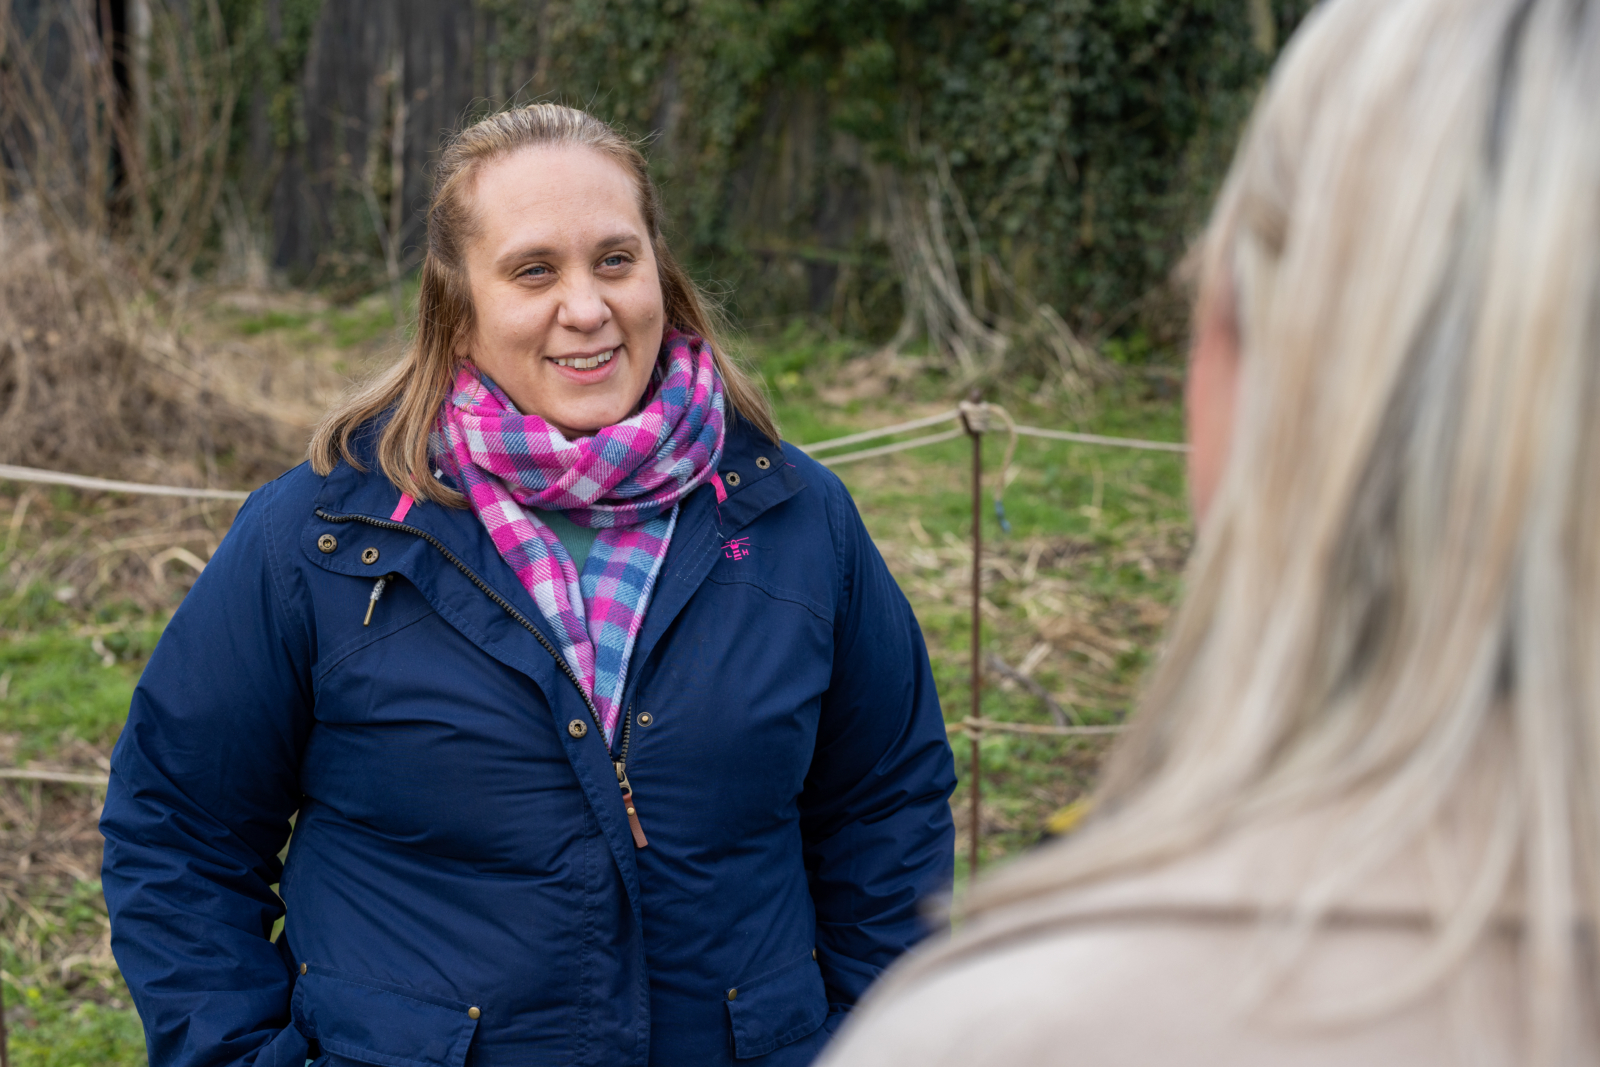 A lady with a blue coat and pink and purple scarf smiling and facing a lady with blonde hair. You can only see the back of the head of the lady with blonde hair. They are having a conversation and smiling. Behind the lady with the blue jacket is a rope fence and some tree with leaves on the ground